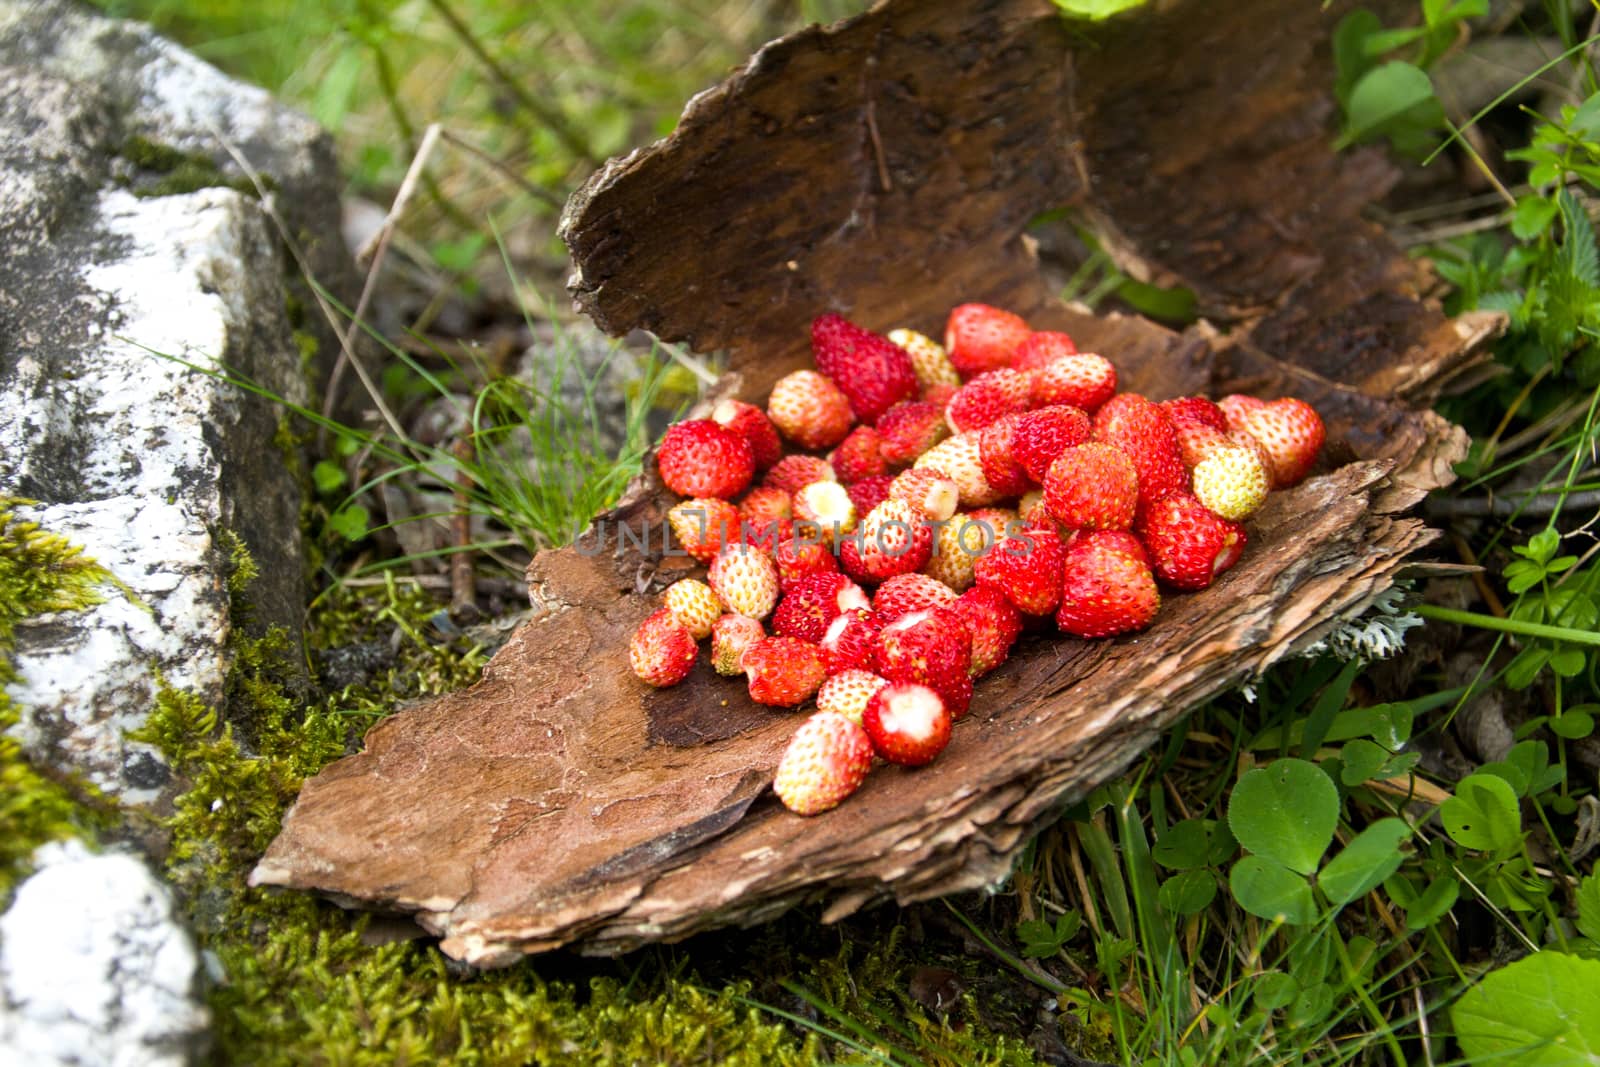 a handfull of wild strawberries placed on a tree crust